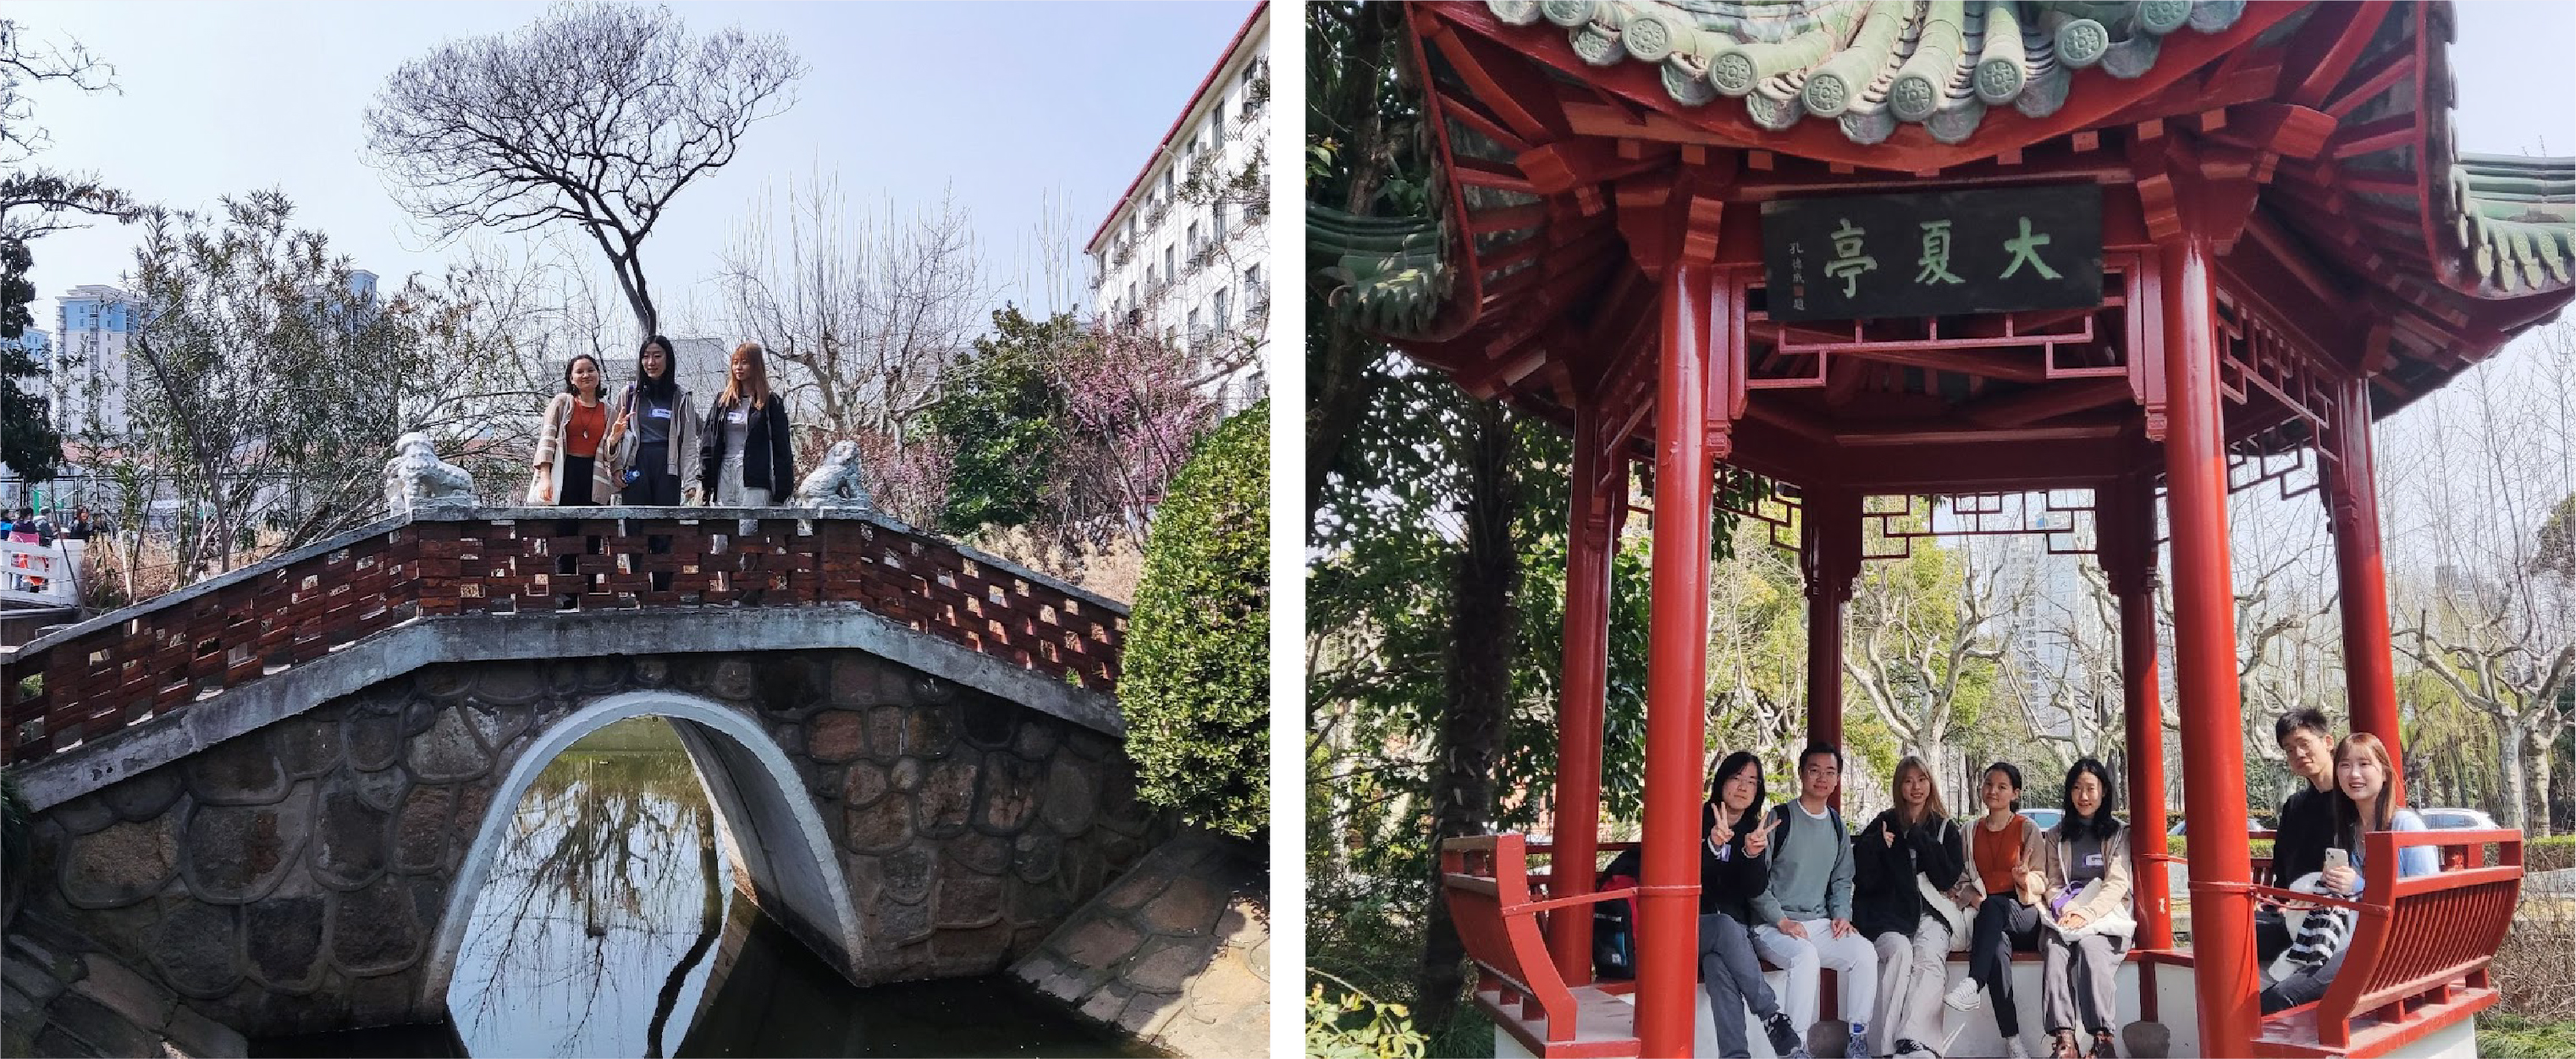 Students take a group photo on bridges and in pagodas at ECNU